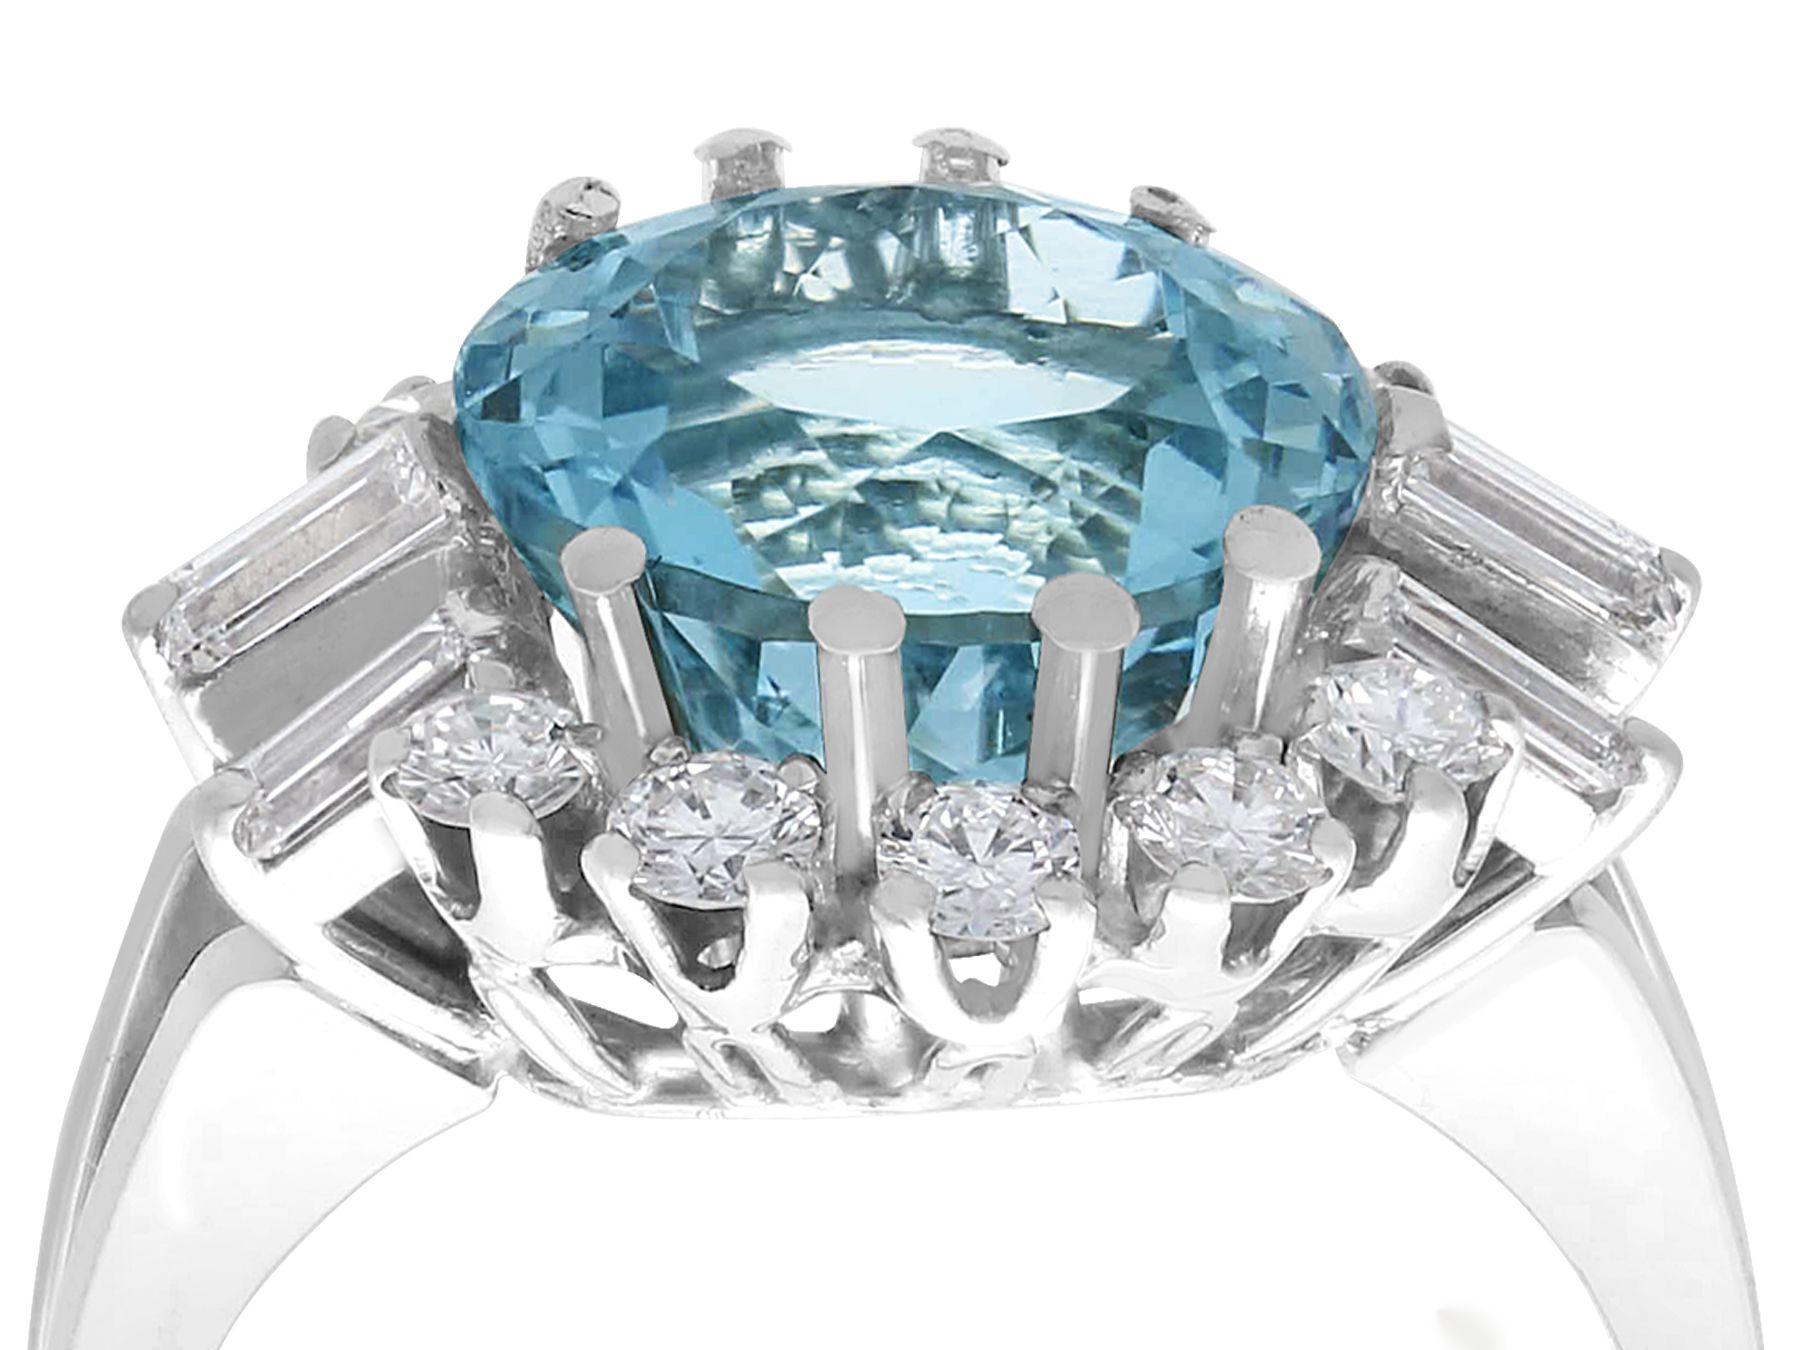 A stunning, fine and impressive vintage 5.22 carat aquamarine and 1.10 carat diamond, 18 karat white gold dress ring; part of our diverse antique jewelry and estate jewelry collections.

This stunning, fine and impressive vintage aquamarine and